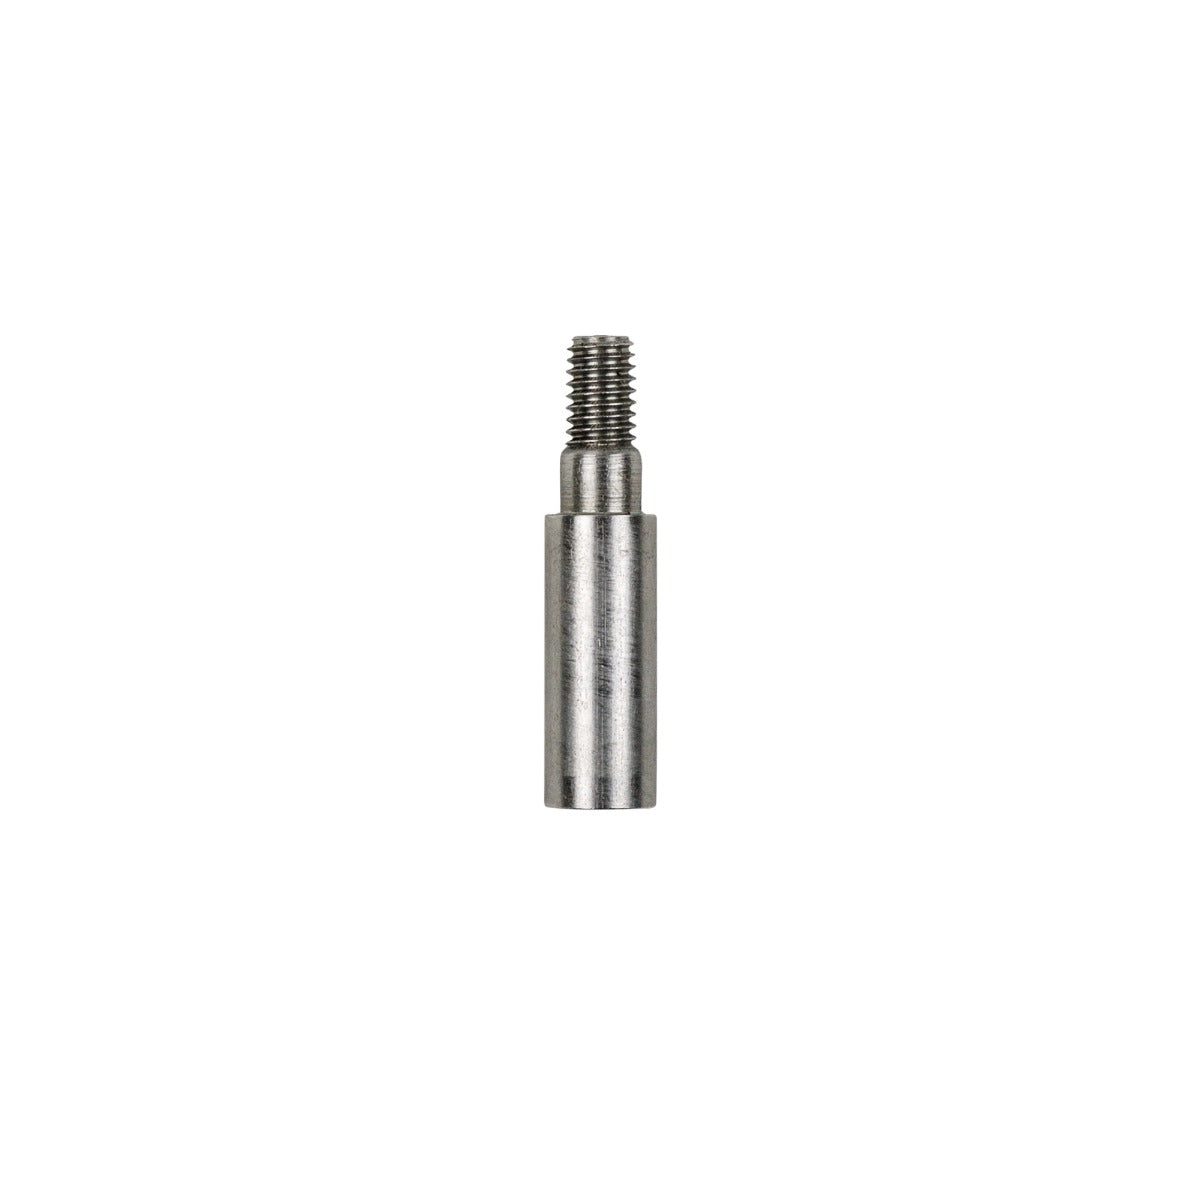 Thread Adapter (6mm Male to 7mm Female)